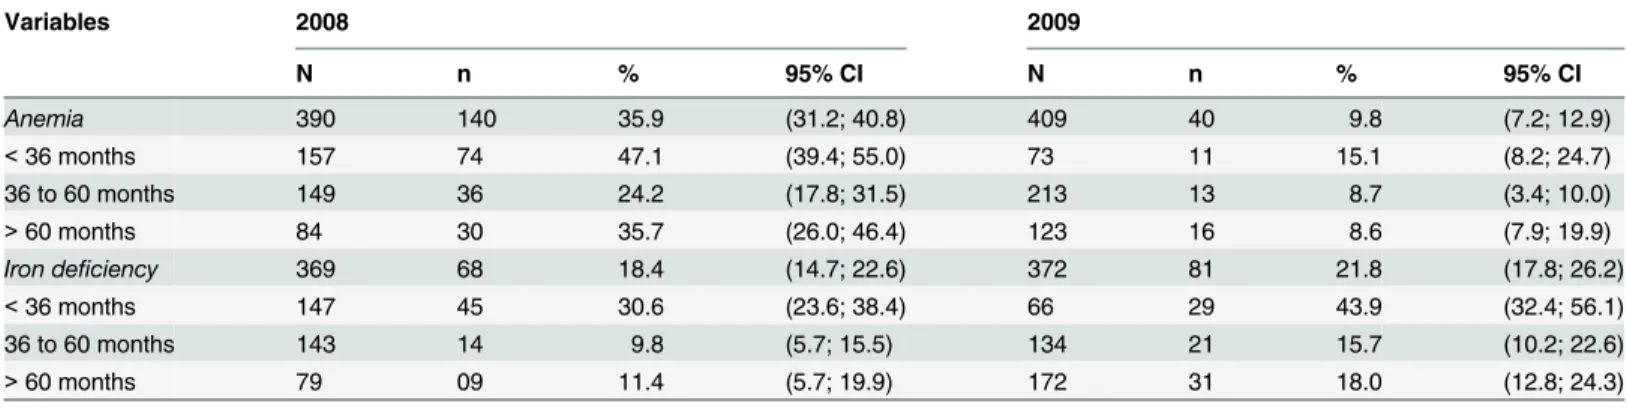 Table 1 shows the prevalence of anemia and iron deficiency globally and per age group.